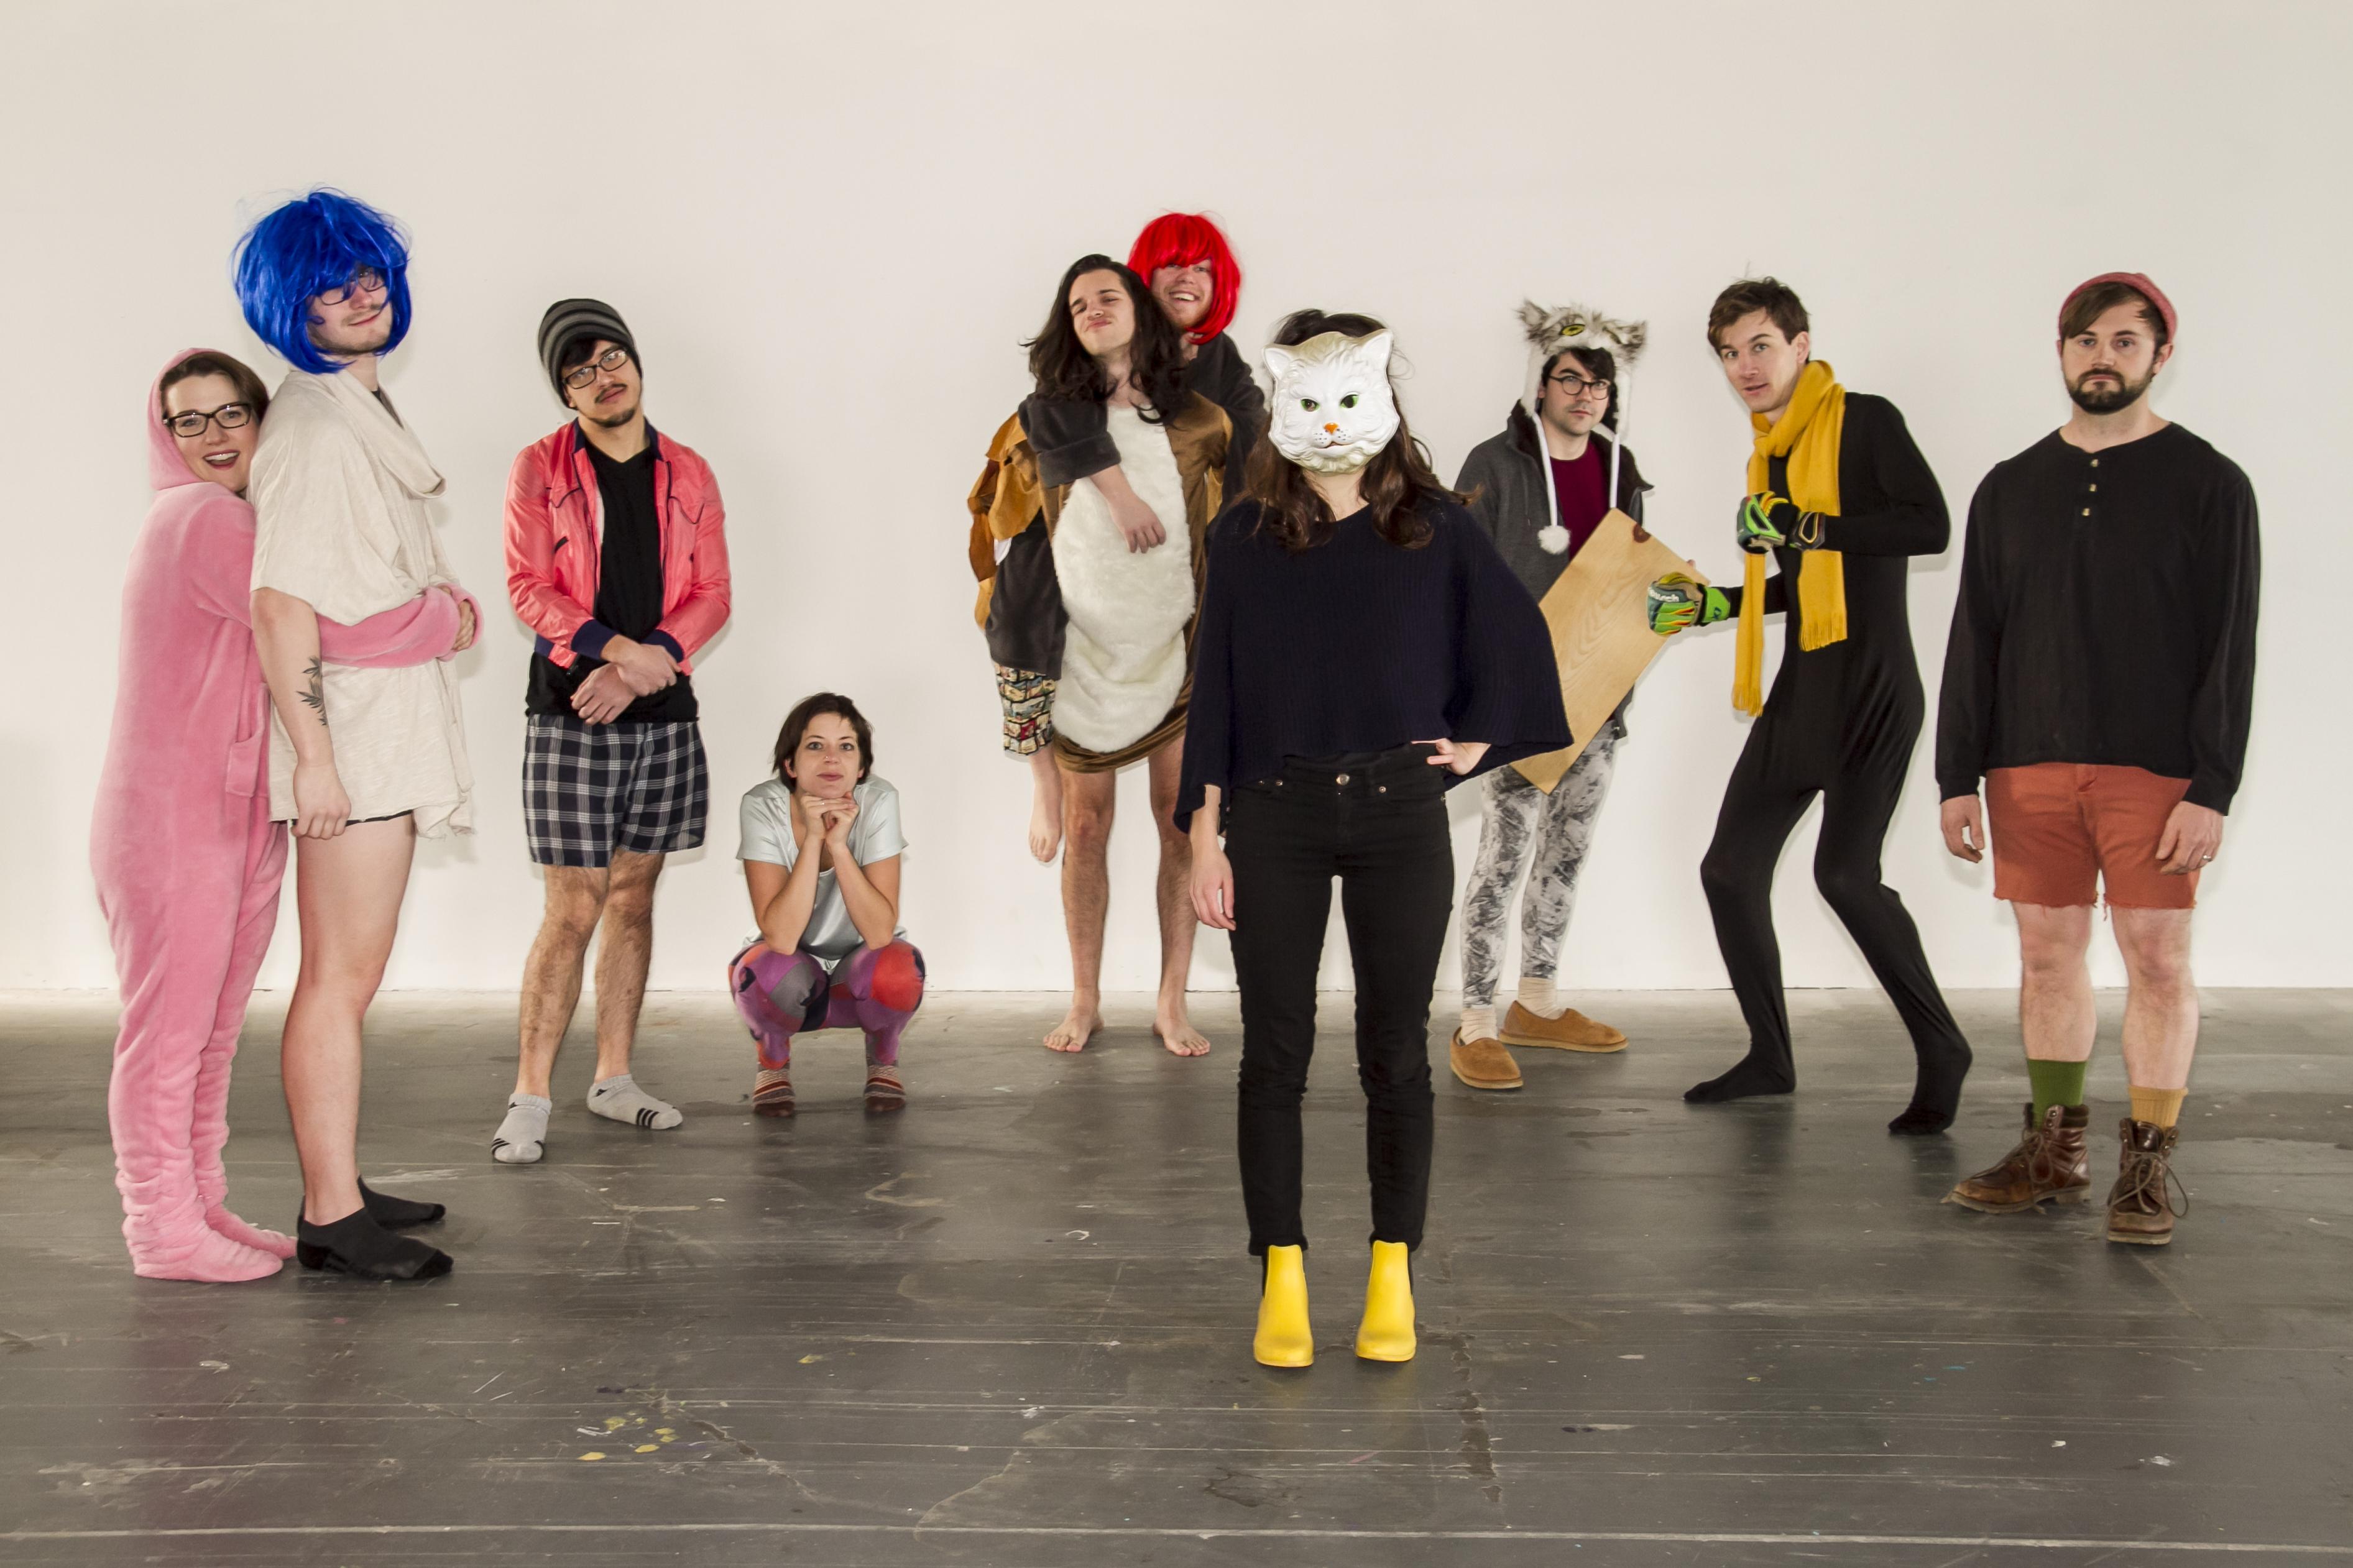 A group of young people pose playfully in an empty room standing in an semi-circle behind one person wearing a cat mask, black shirt and pants, and bright yellow shoes. Some wear brightly colored wigs and colorful clothing.